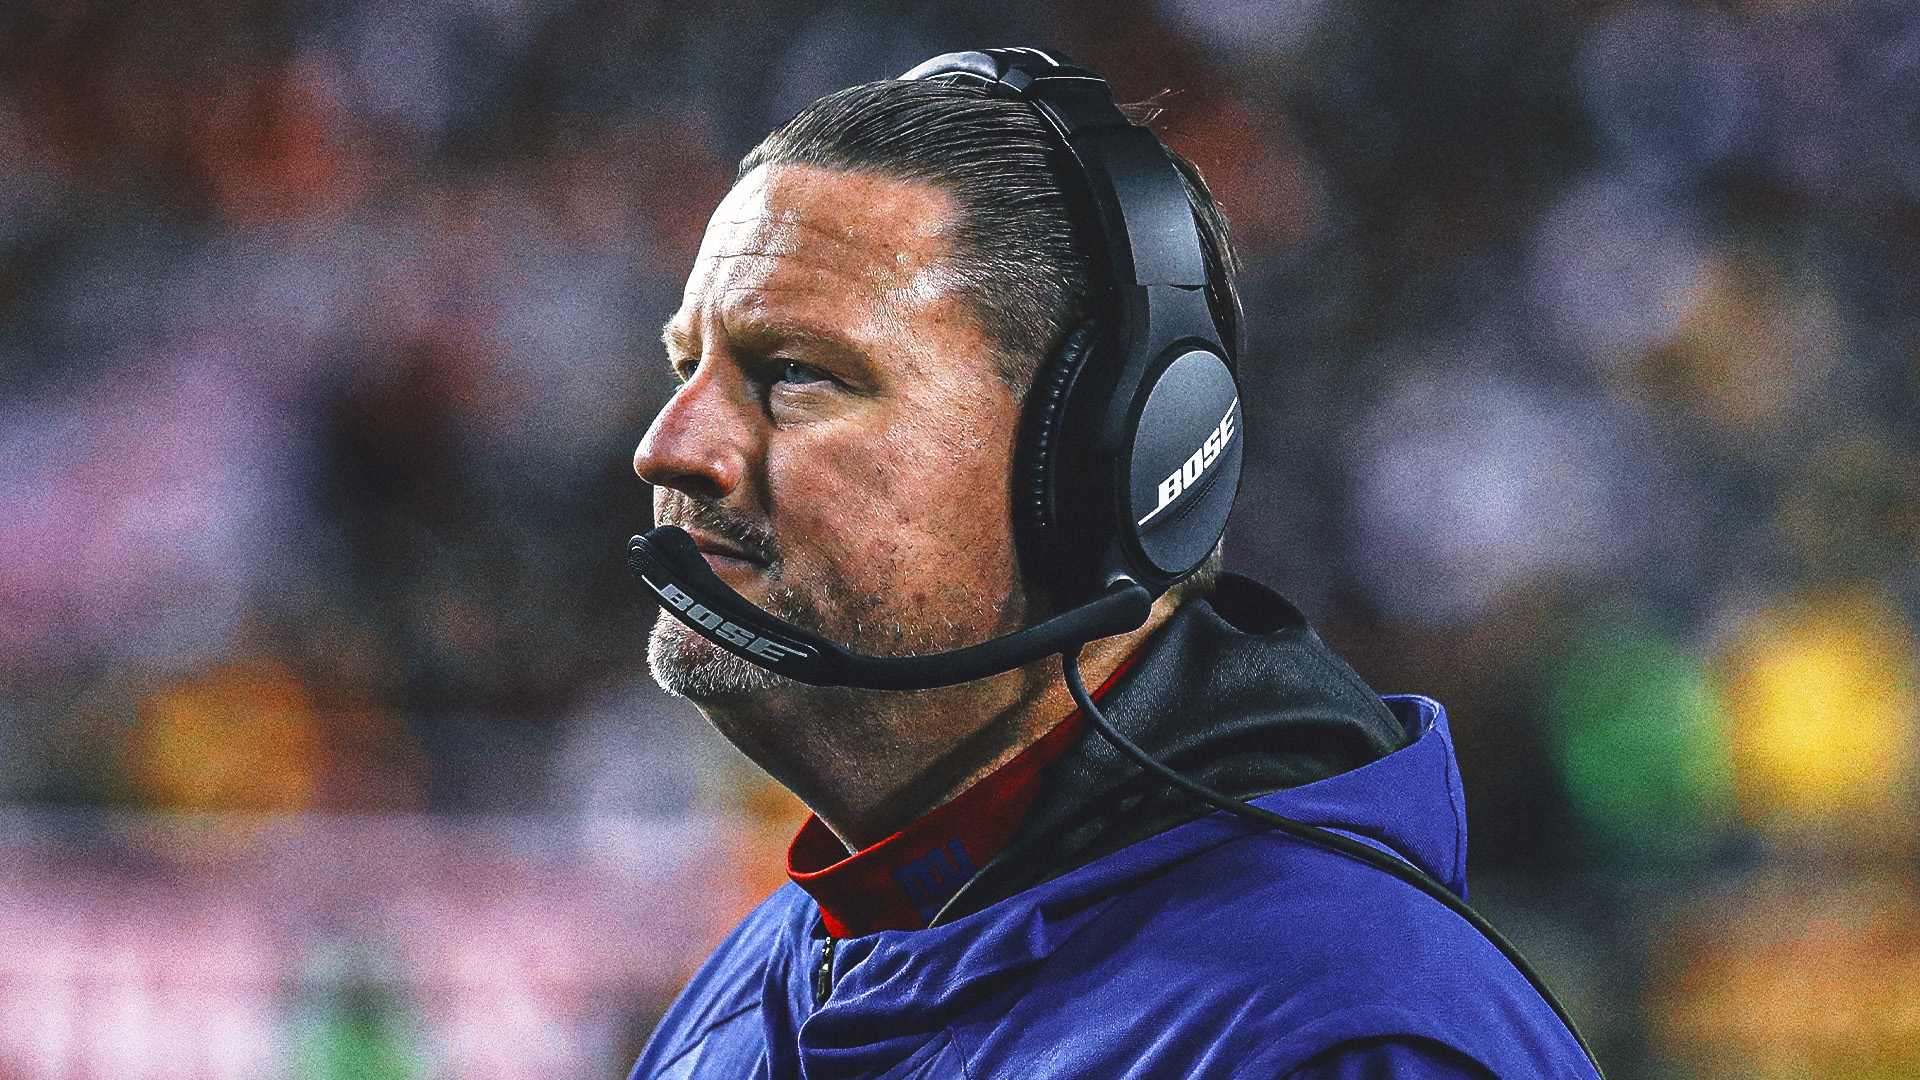 Former Giants coach Ben McAdoo reportedly working out deal to join Patriots' coaching staff